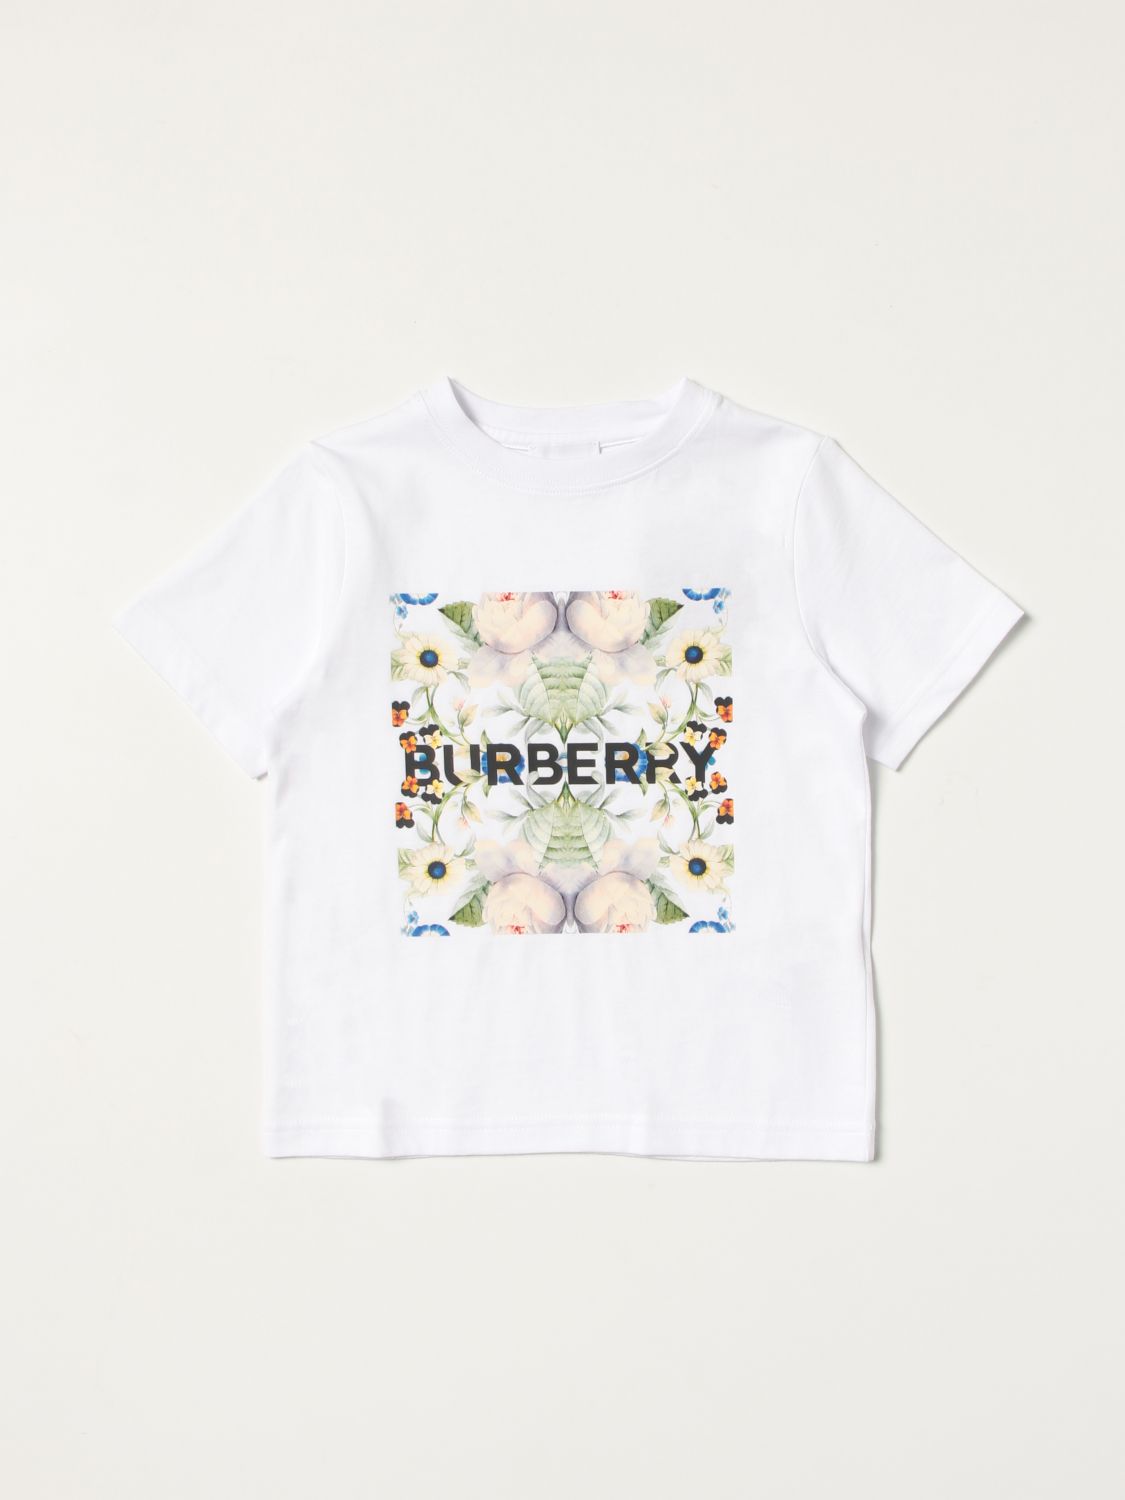 Burberry Outlet: Dutch t-shirt with collage print - White | Burberry  t-shirt 8048607 online on 